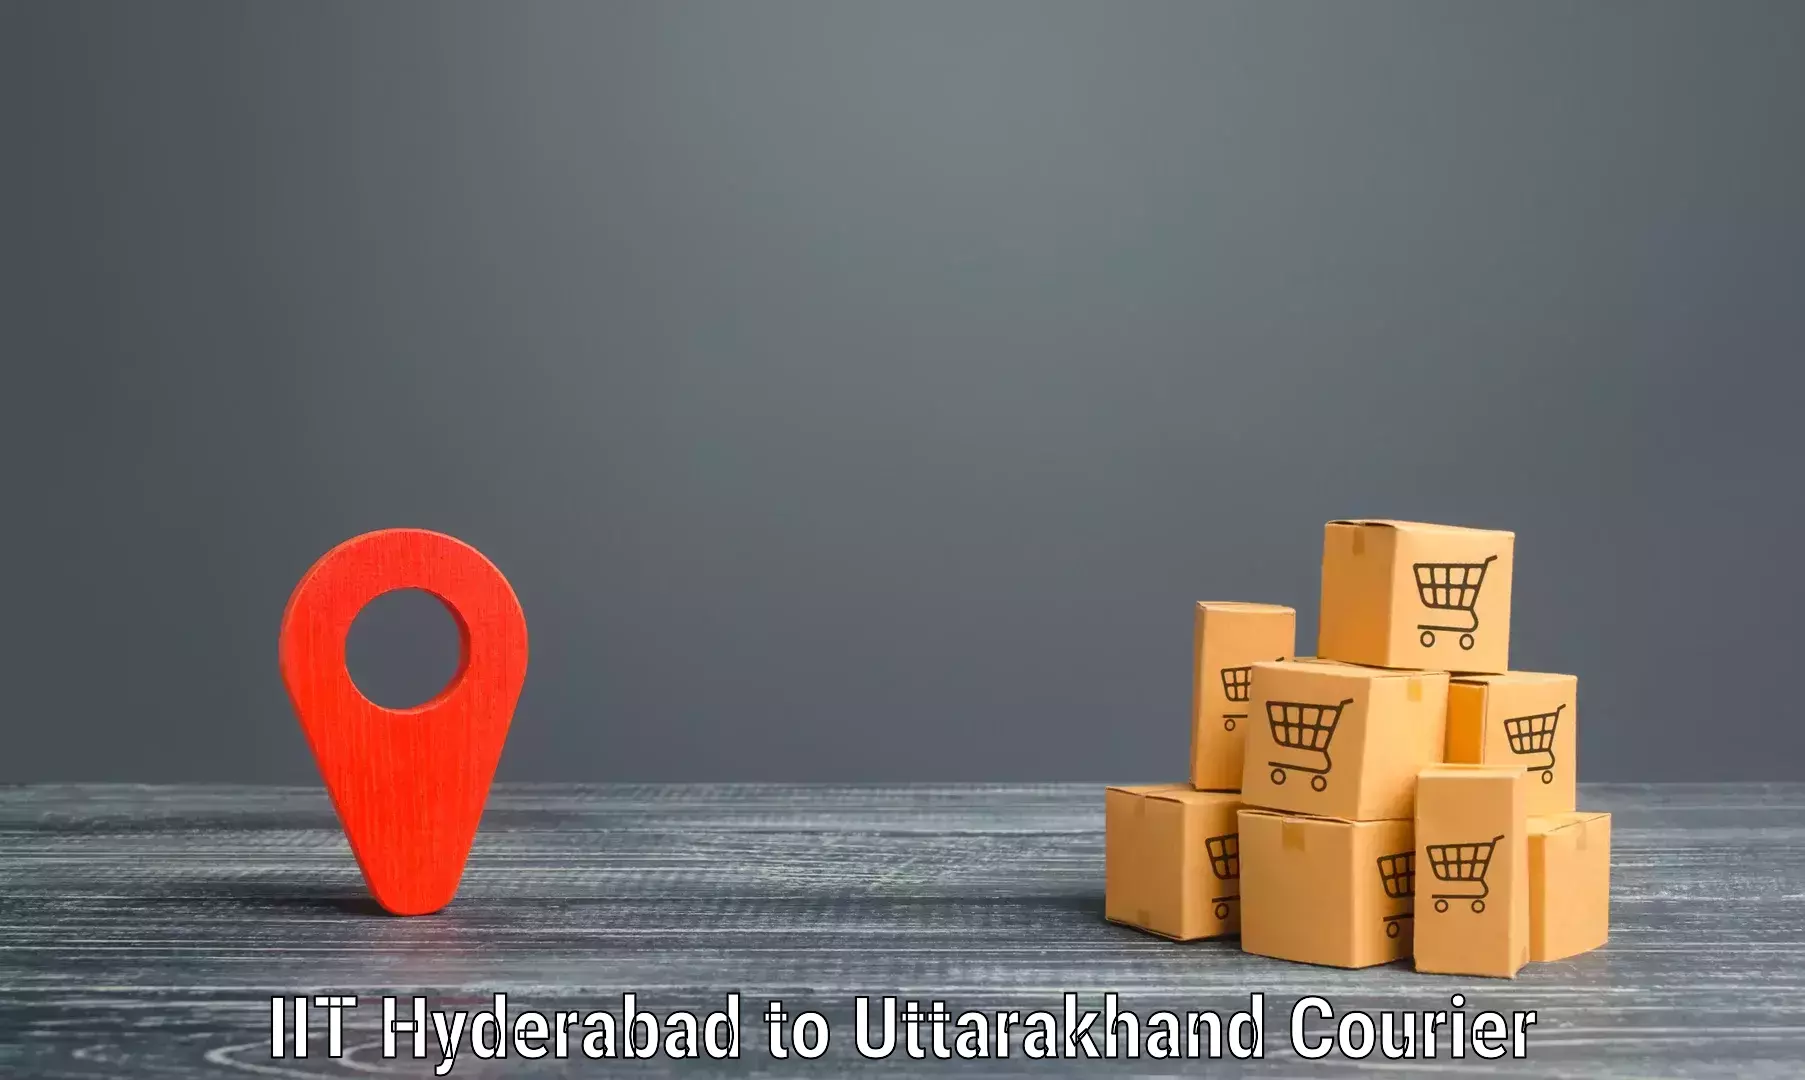 Nationwide courier service IIT Hyderabad to Rudrapur